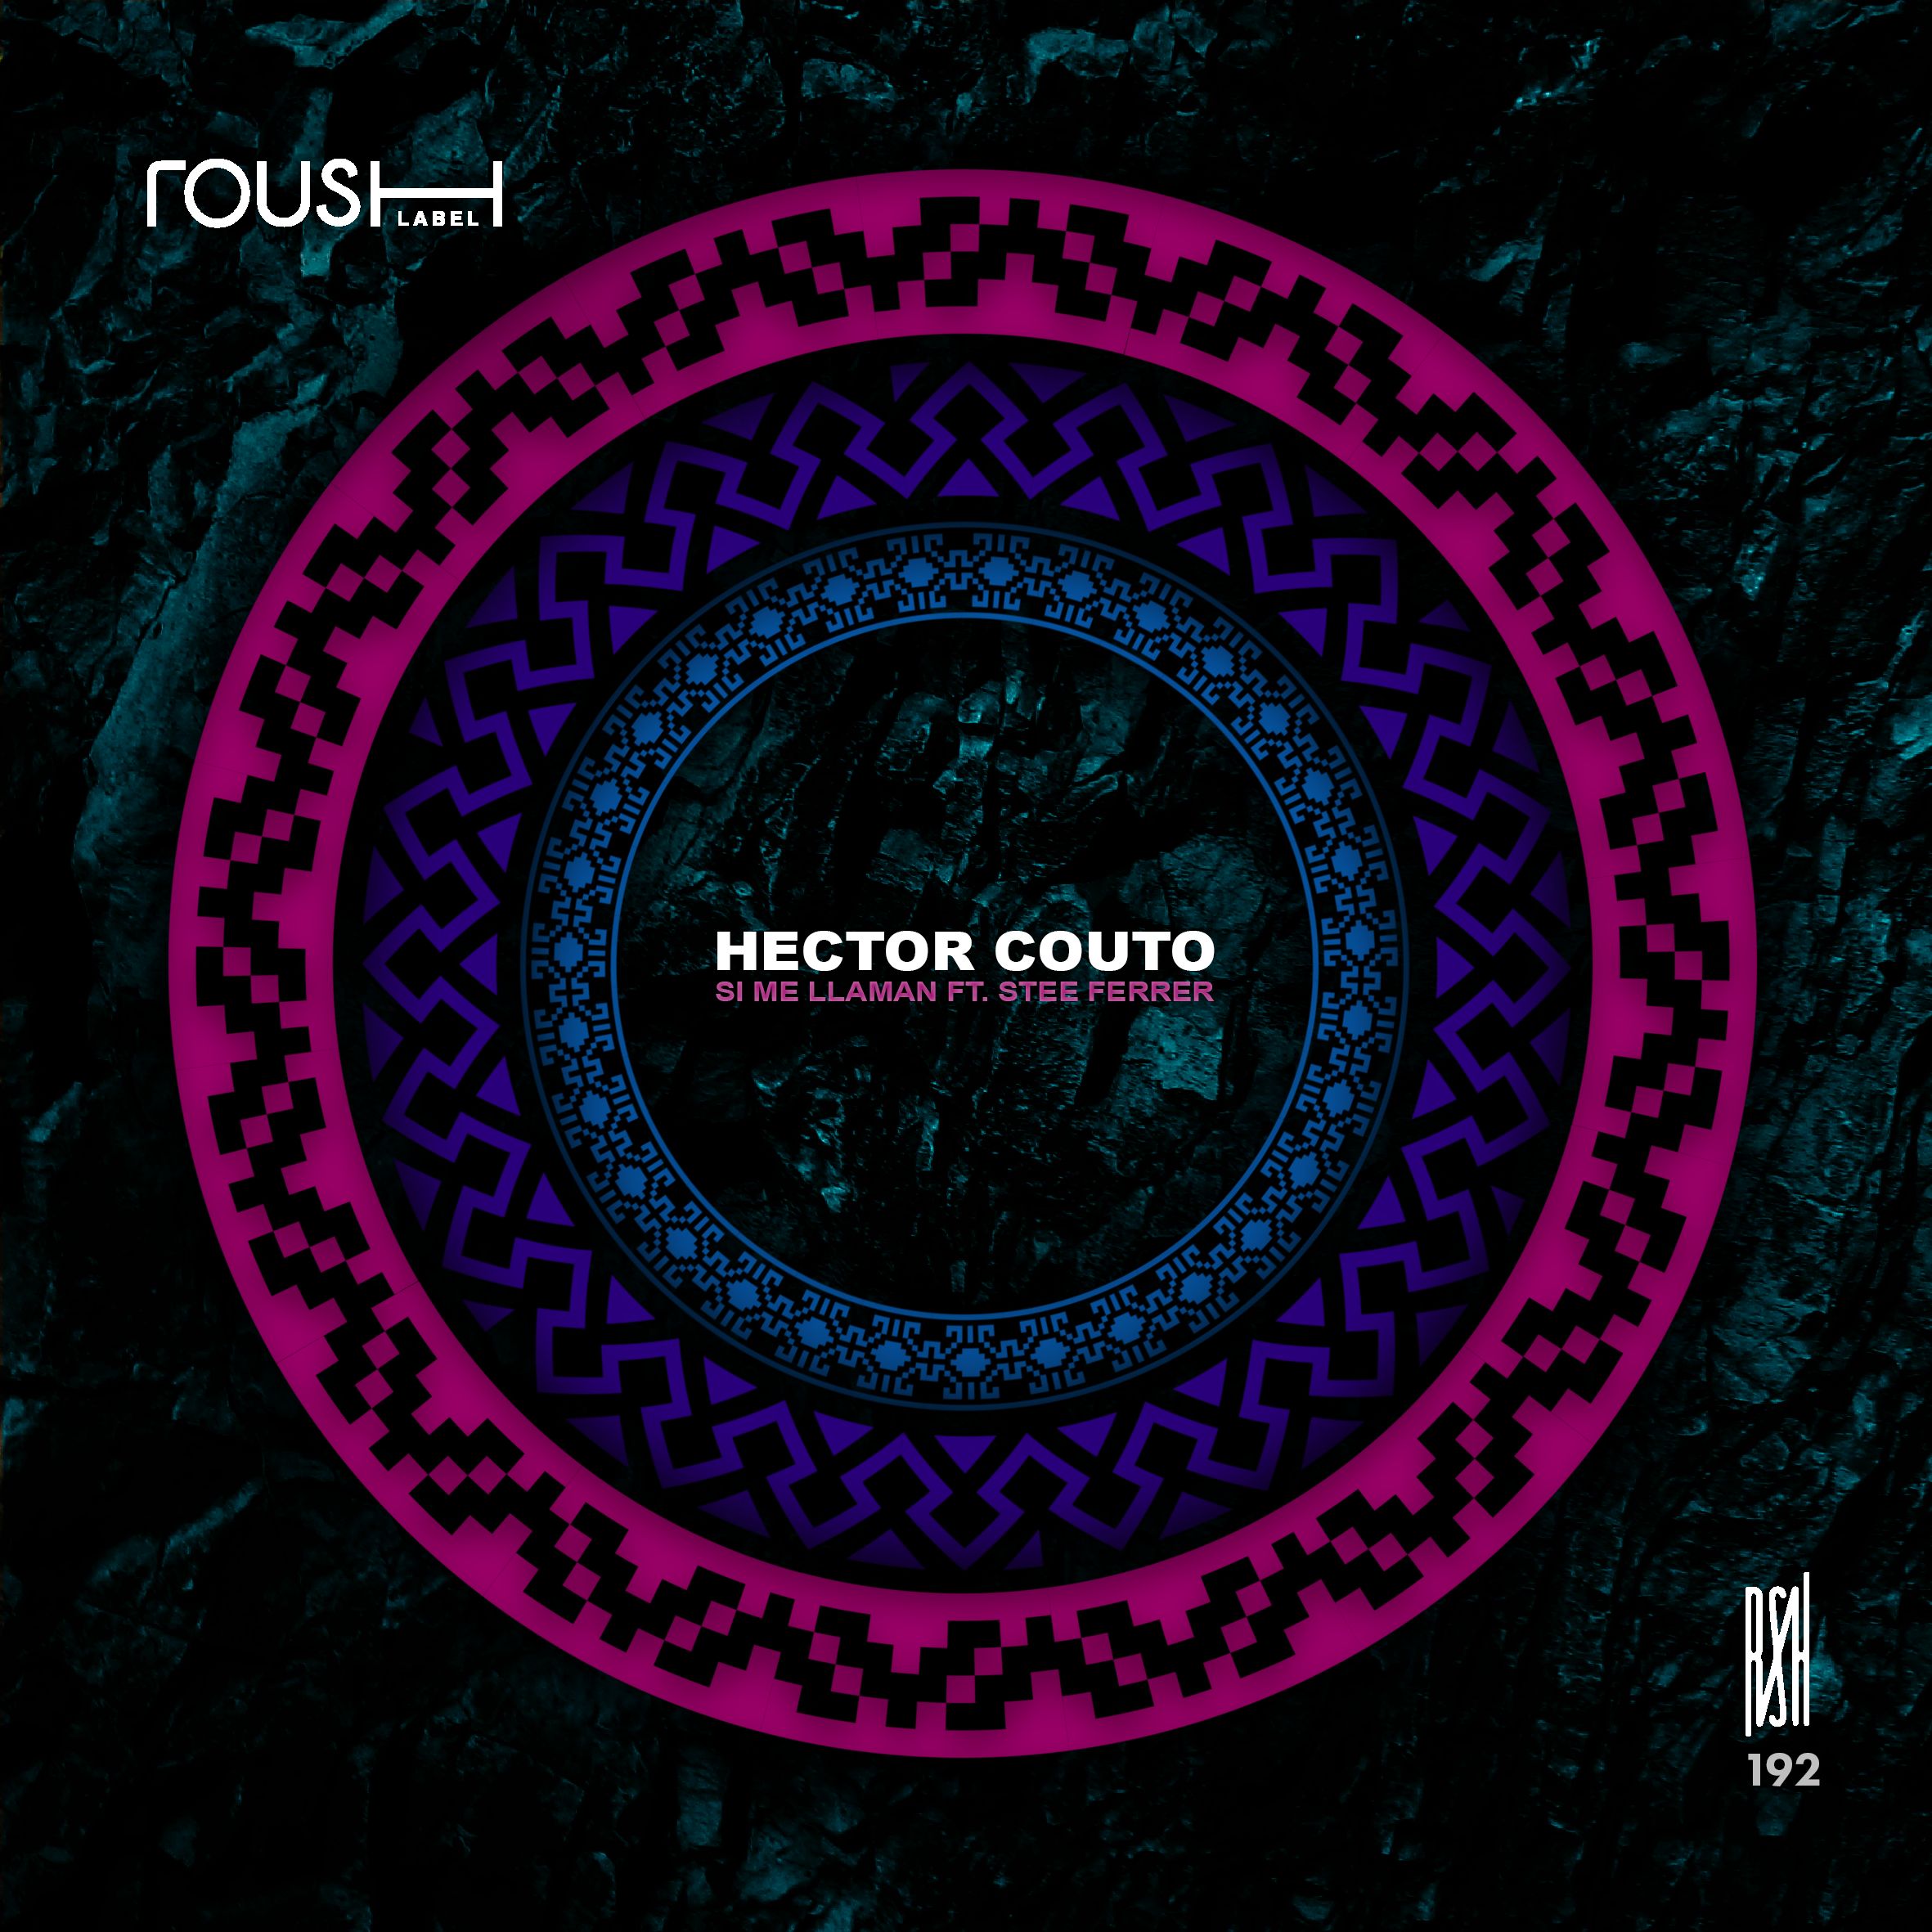 Hector Couto - Si Me Llaman Ft. Stee Ferrer - Roush Label